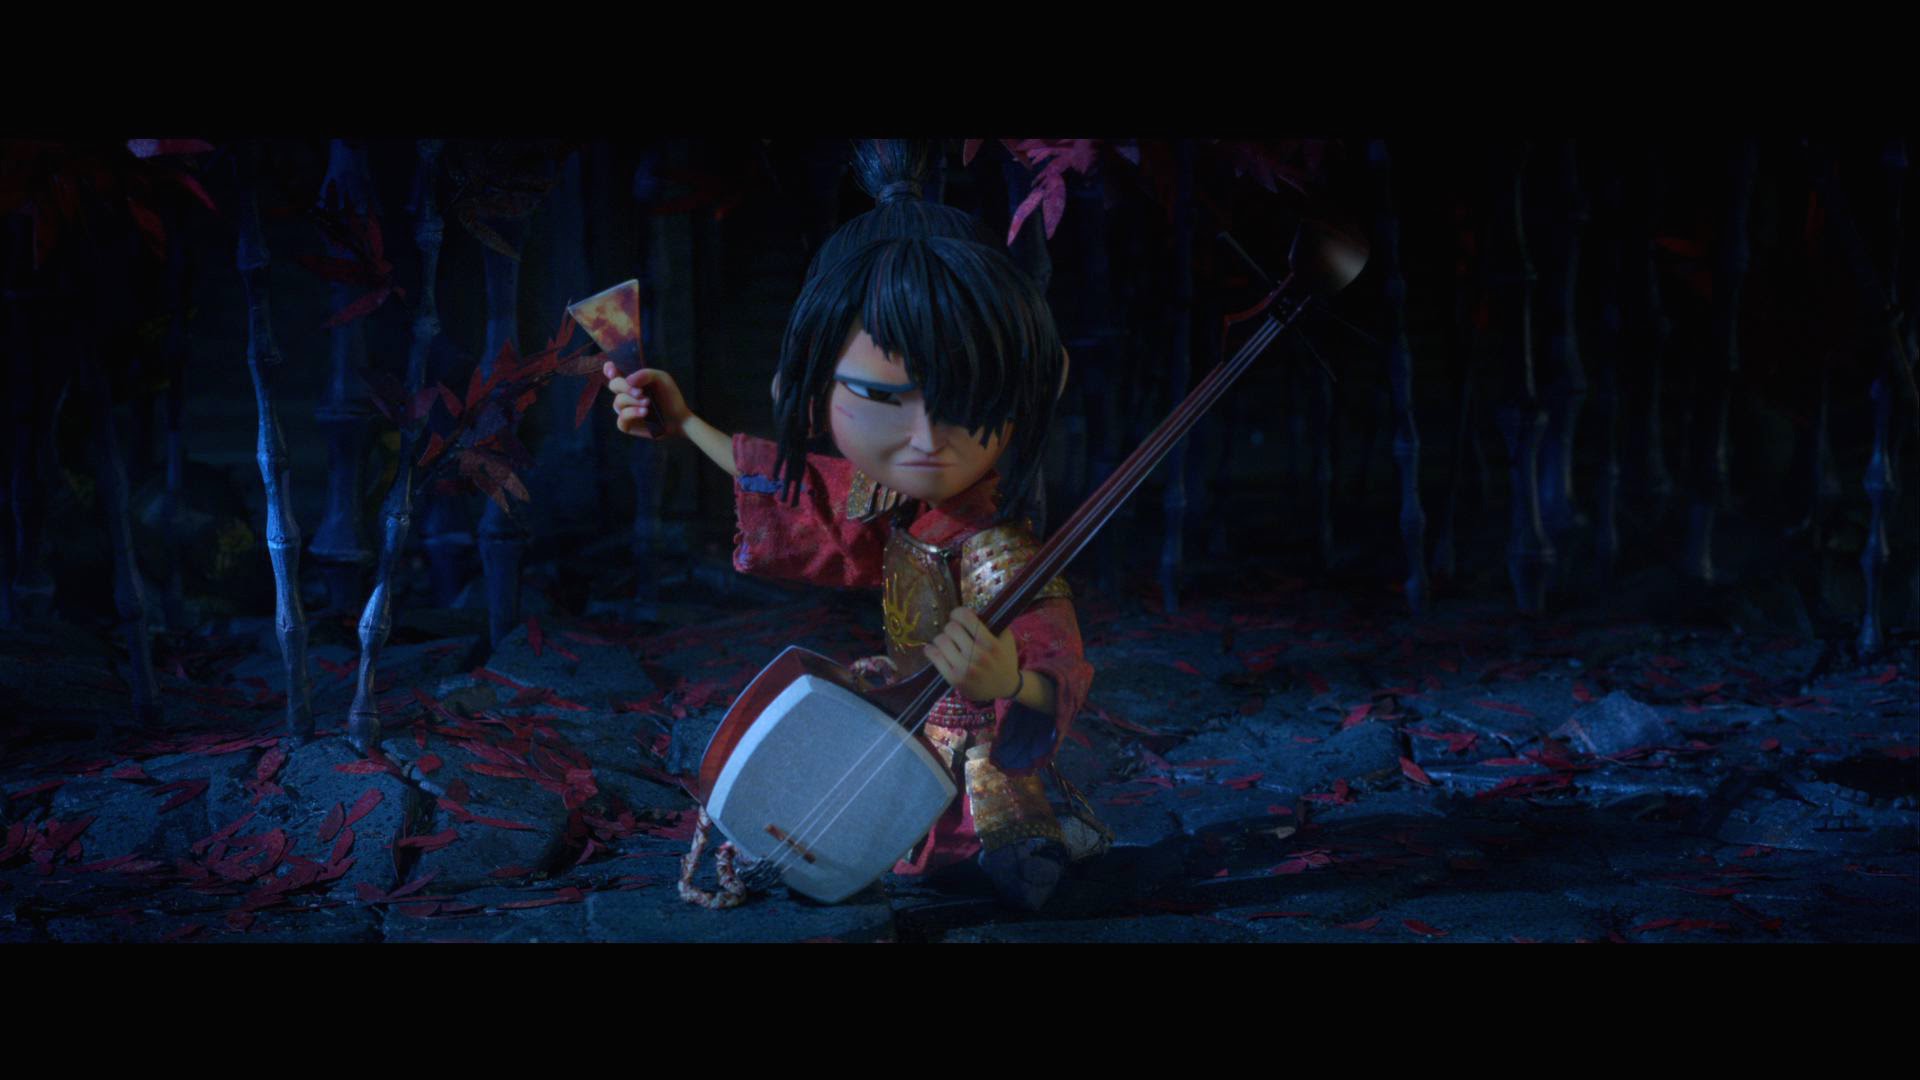 Kubo and the Two Strings’ creepy adventure doesn’t miss a beat